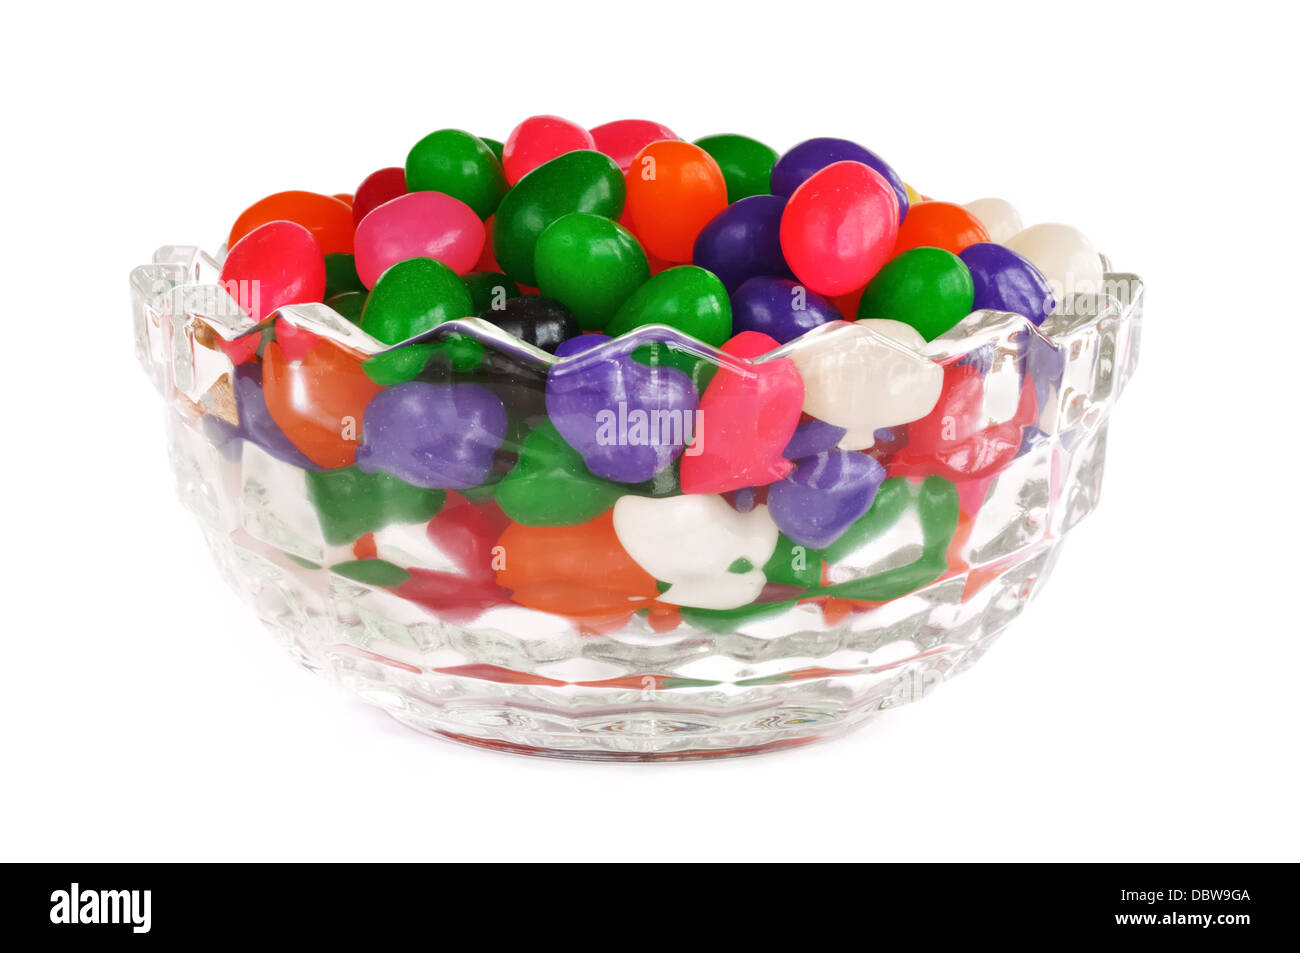 Jelly beans in a bowl on white background Stock Photo